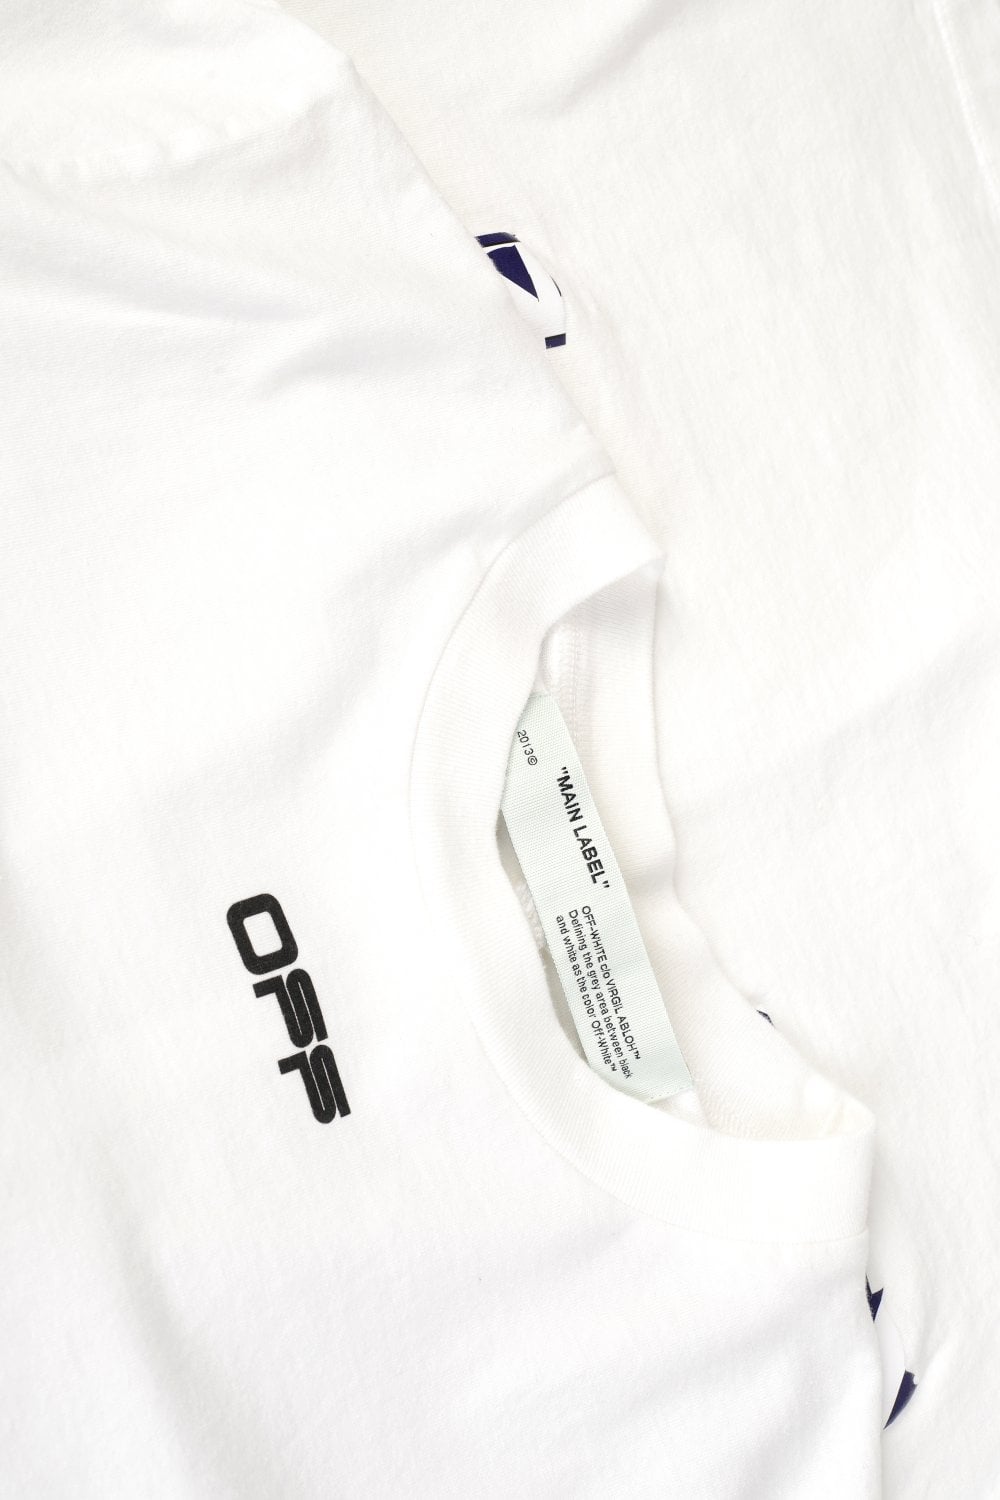 OFF WHITE  Airport Tape Short Sleeve T-Shirt